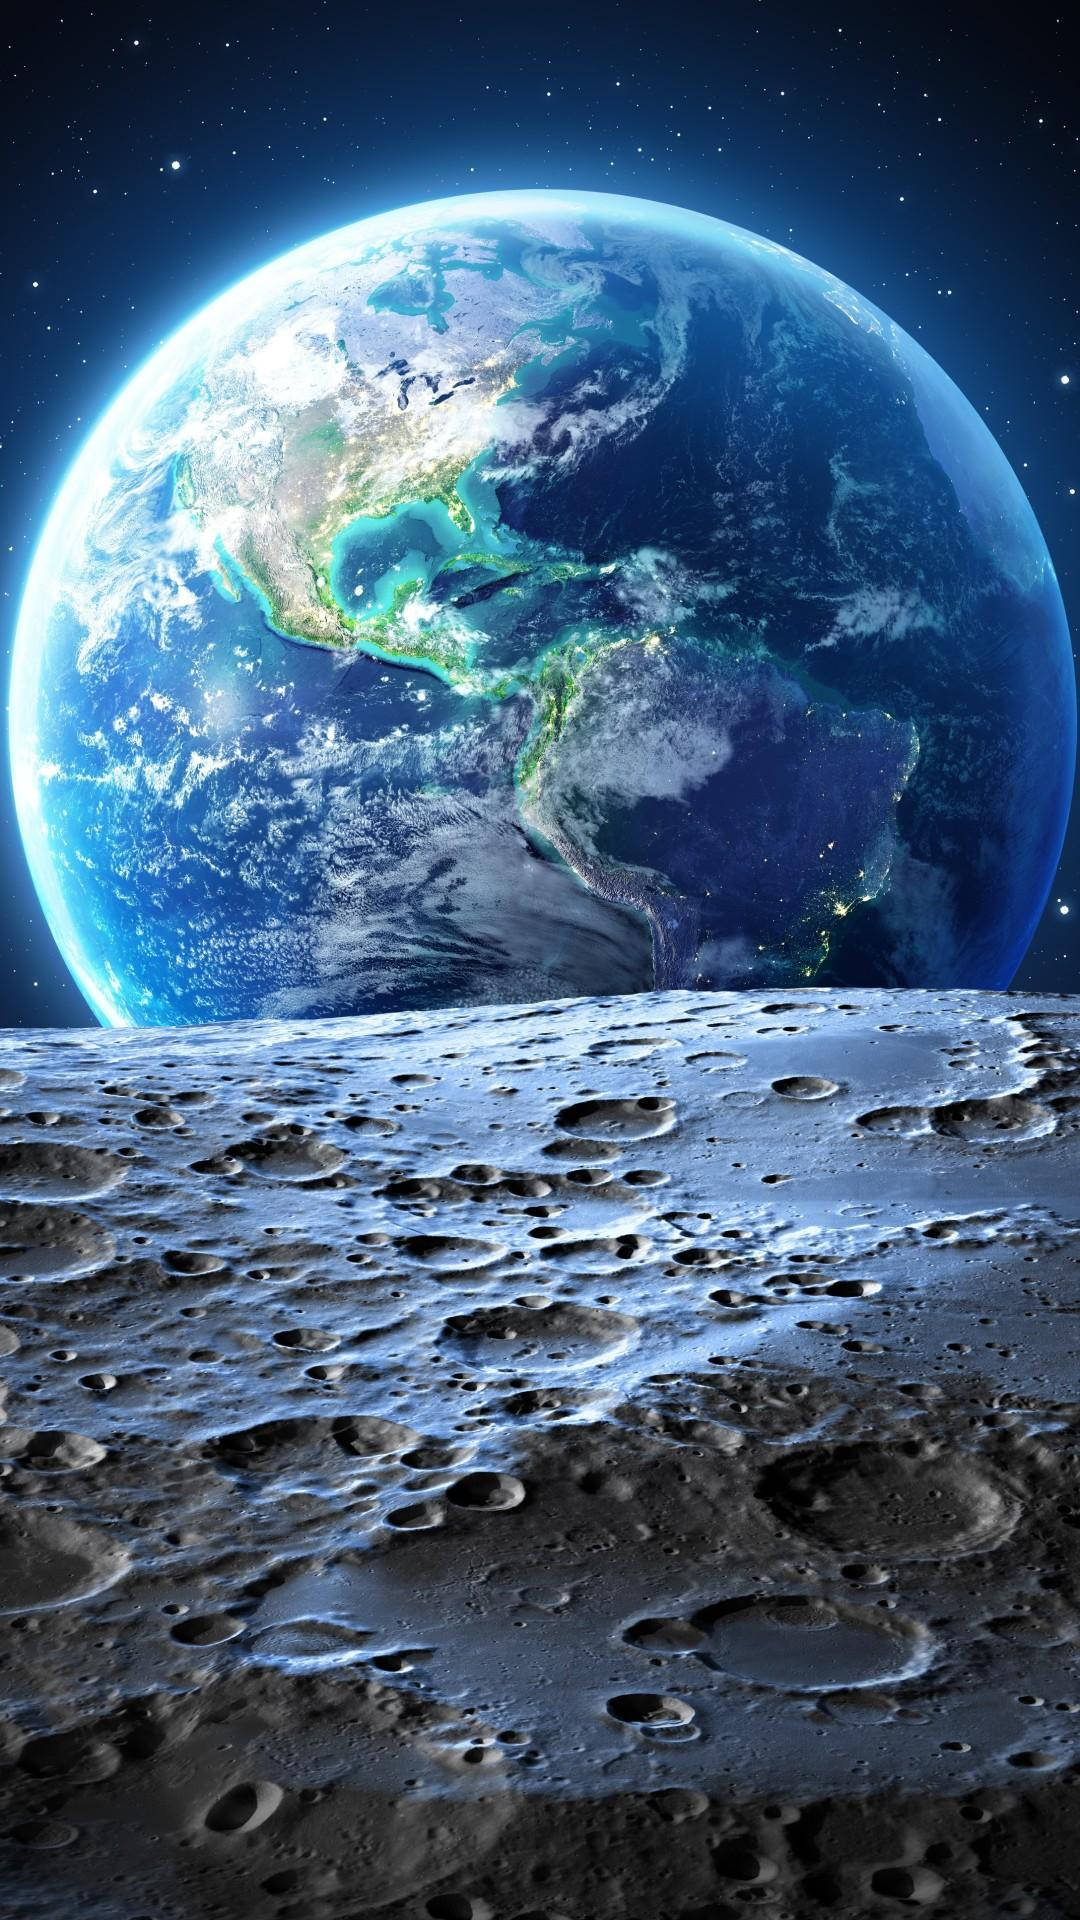 Moon Looking Over Earth Iphone 6 Wallpaper